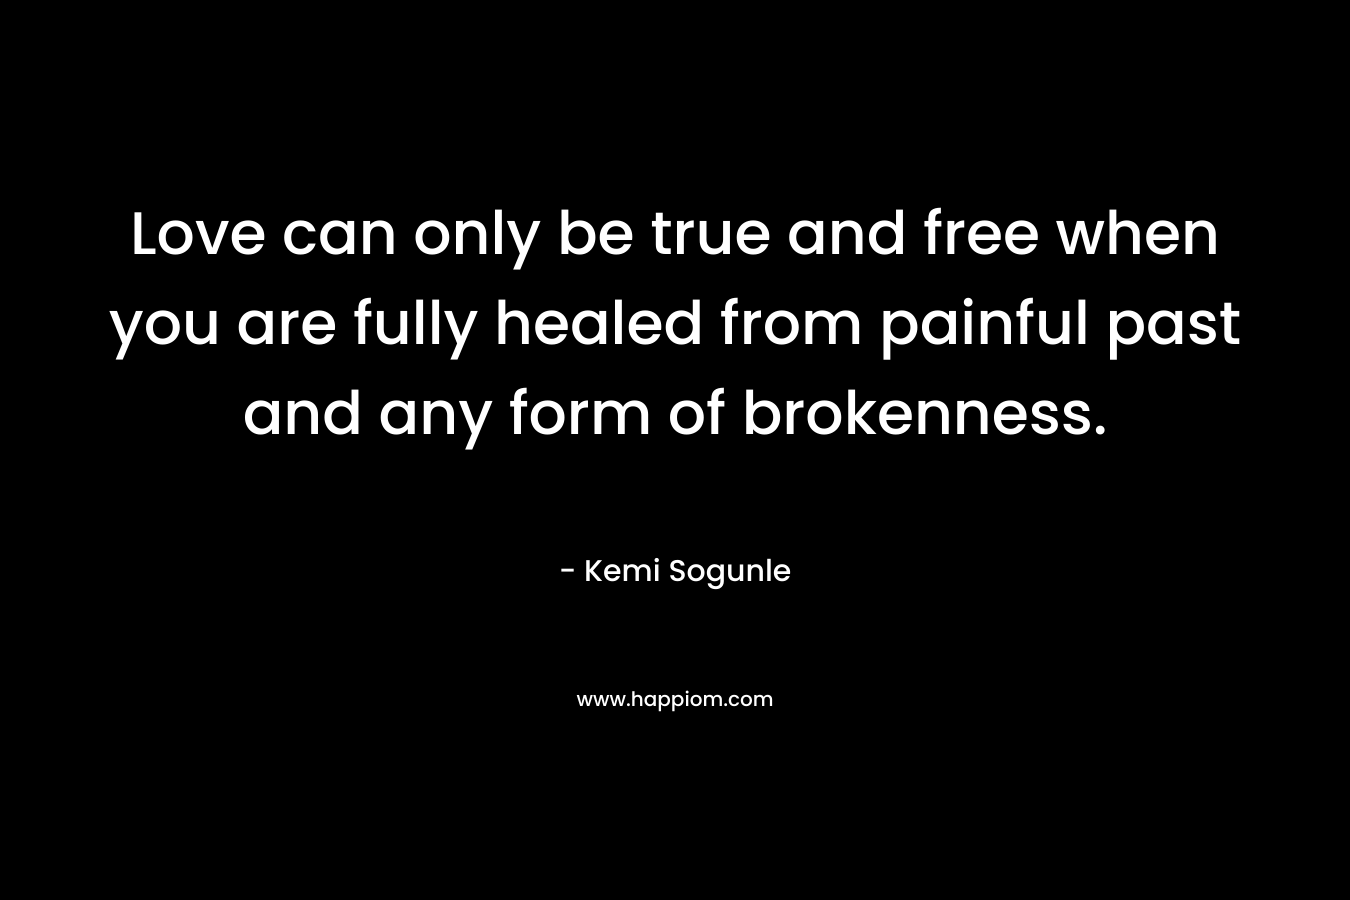 Love can only be true and free when you are fully healed from painful past and any form of brokenness.